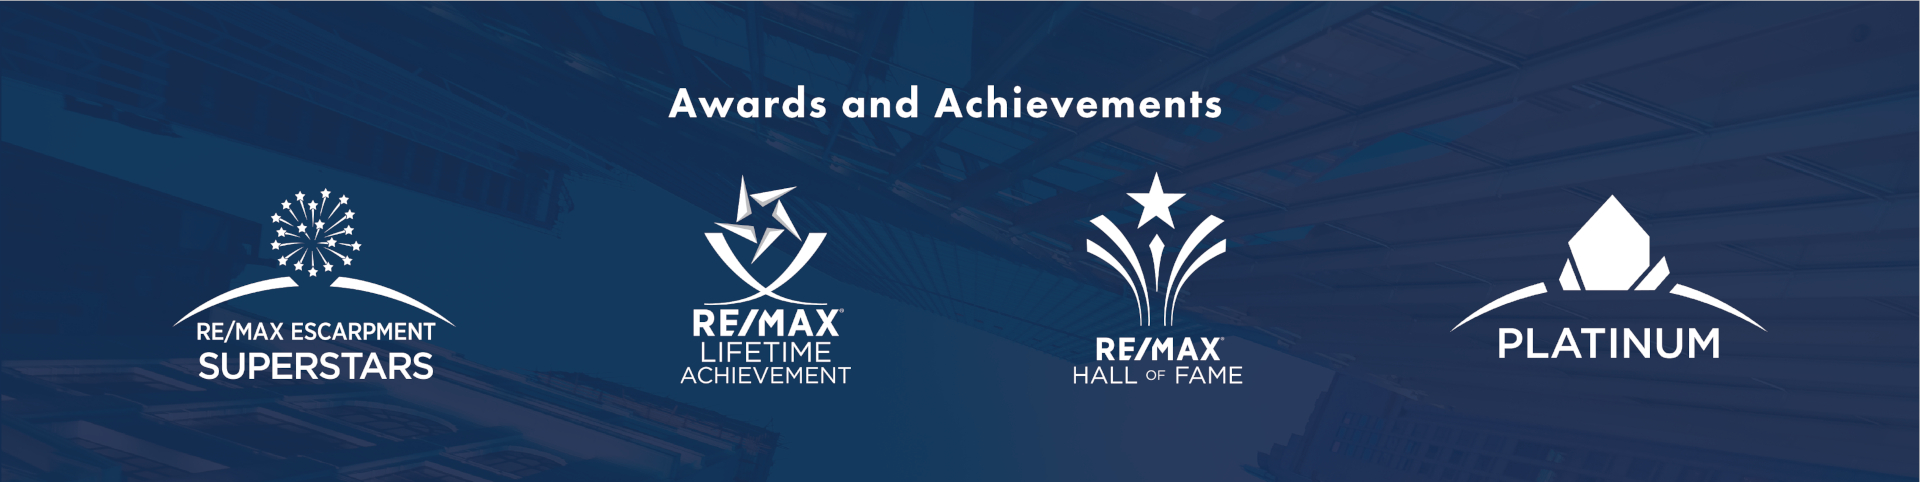 Realty Services Awards and Achievements